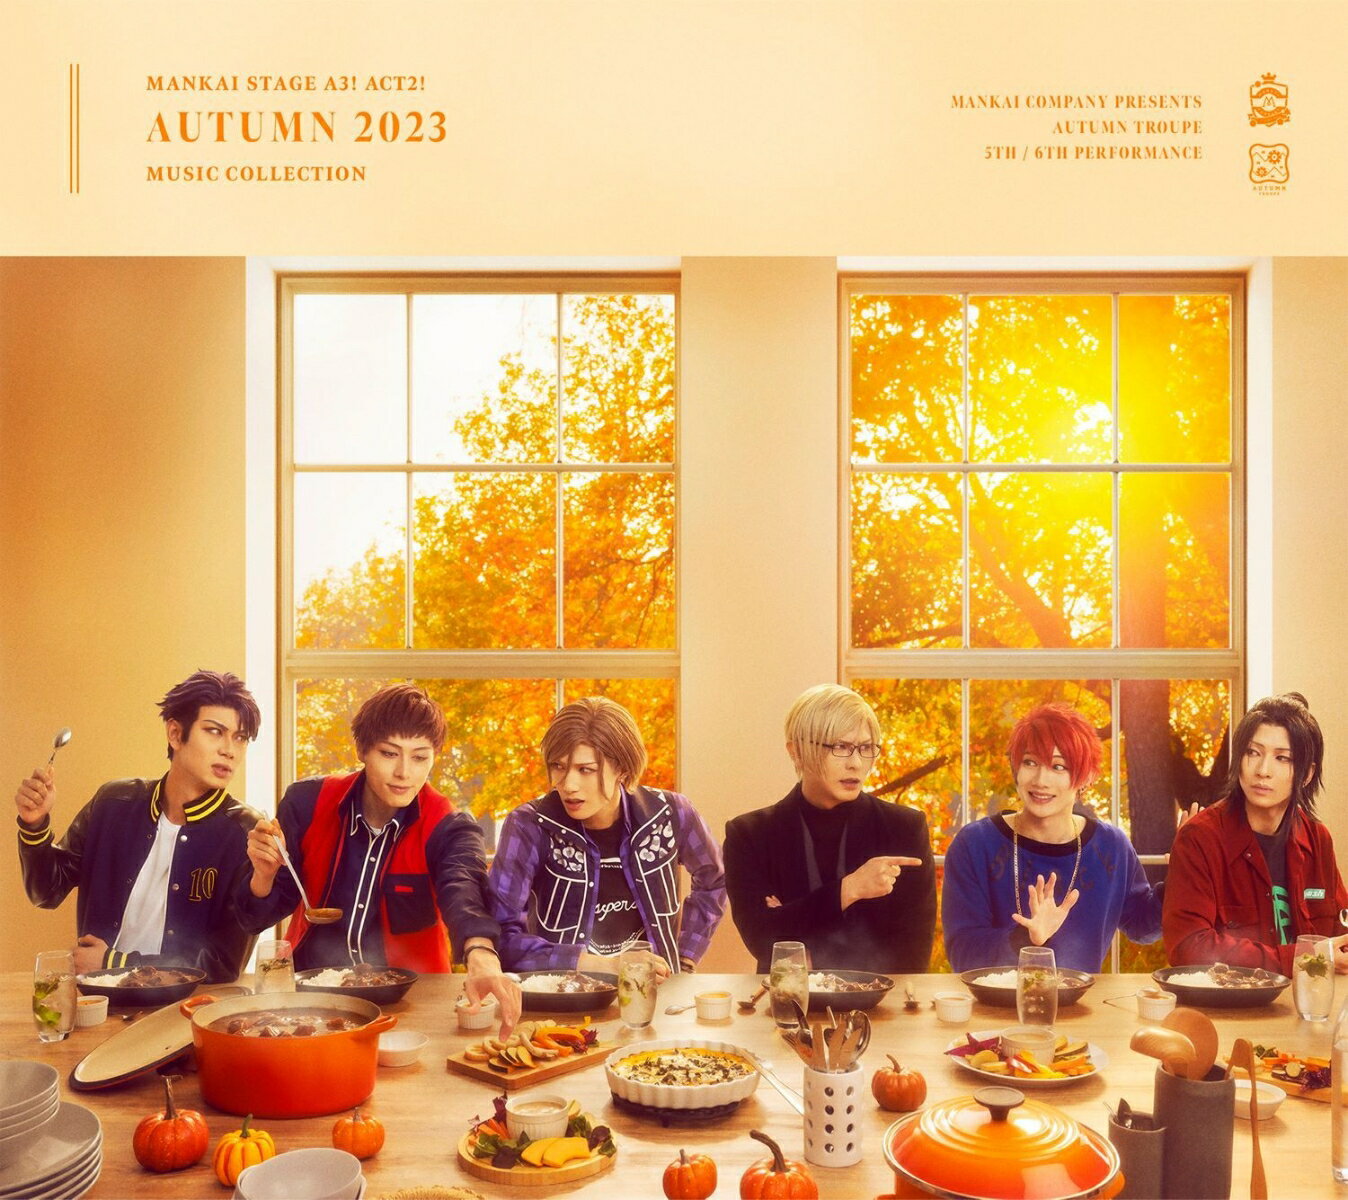 「MANKAI STAGE『A3 』ACT2 ～AUTUMN 2023～」MUSIC COLLECTION 秋組